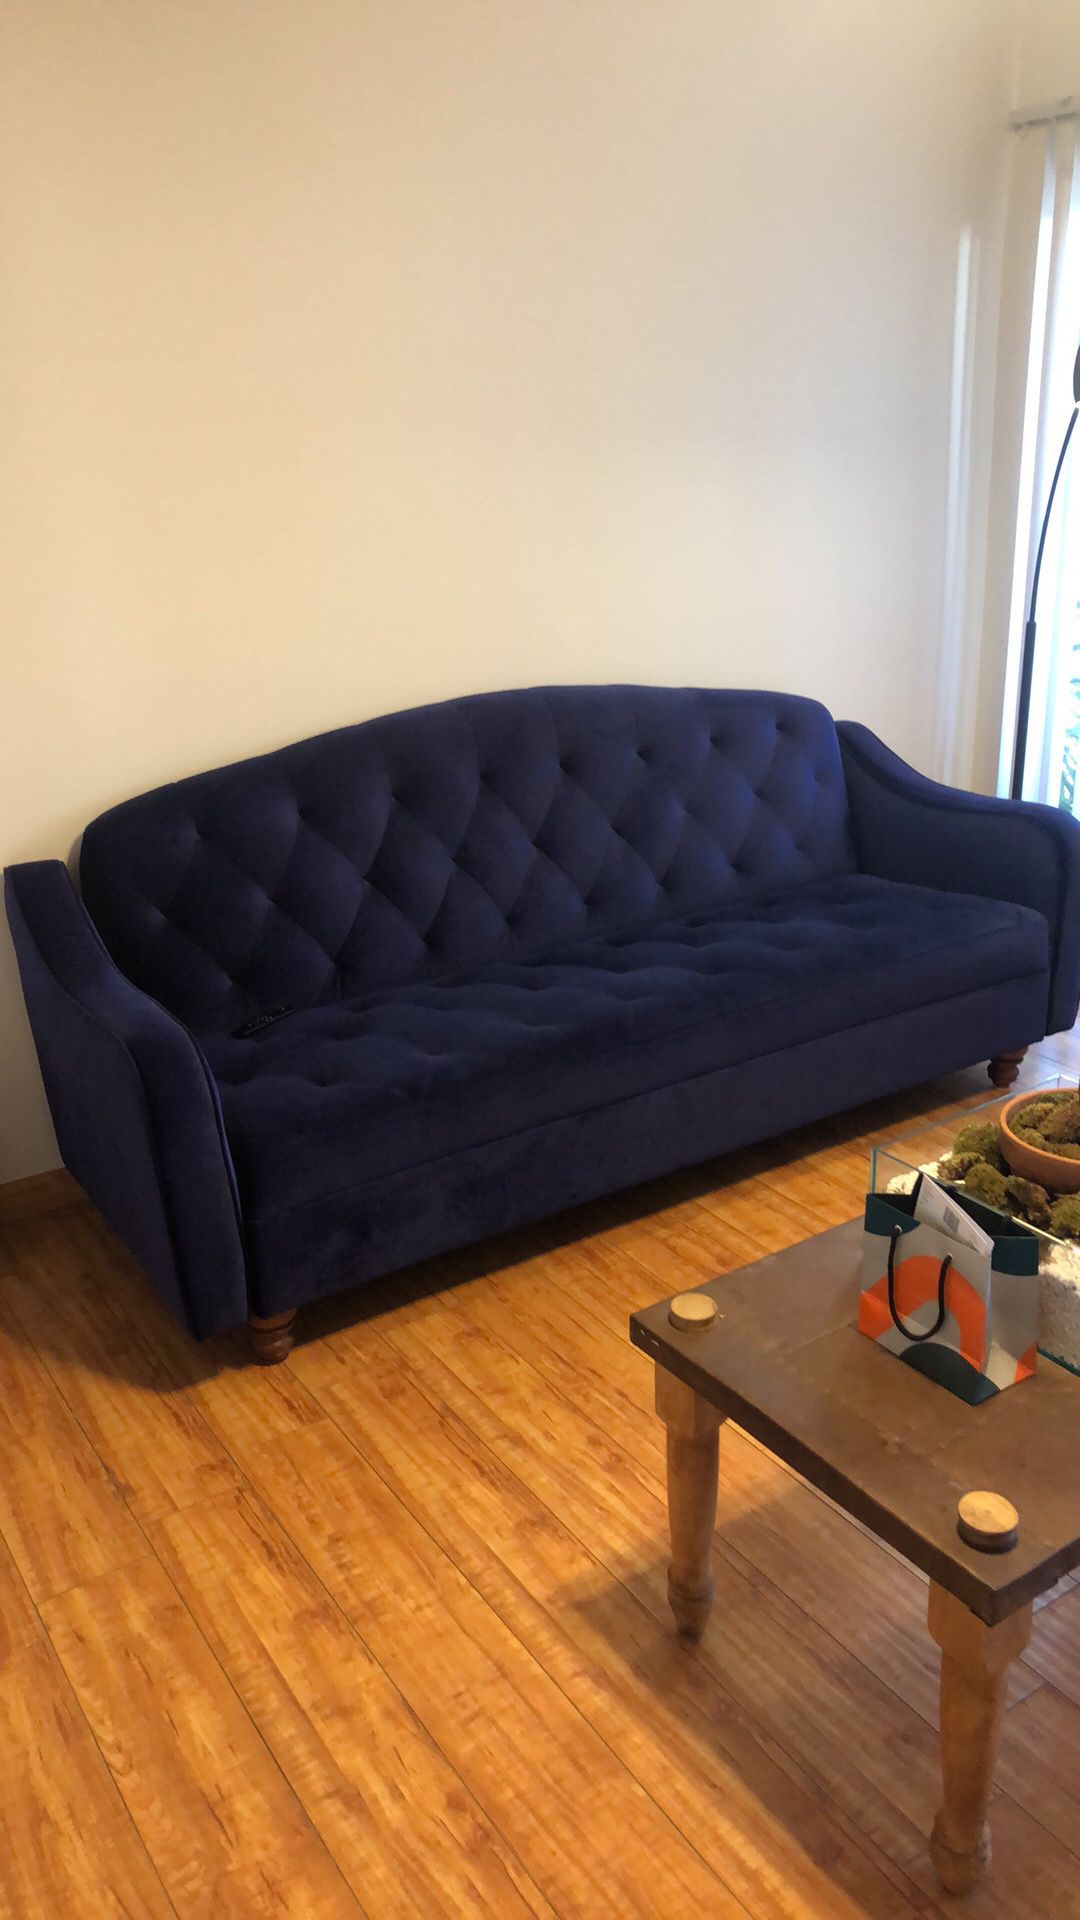 Blue Velvet Urban Outfitters Sleeper Sofa with storage